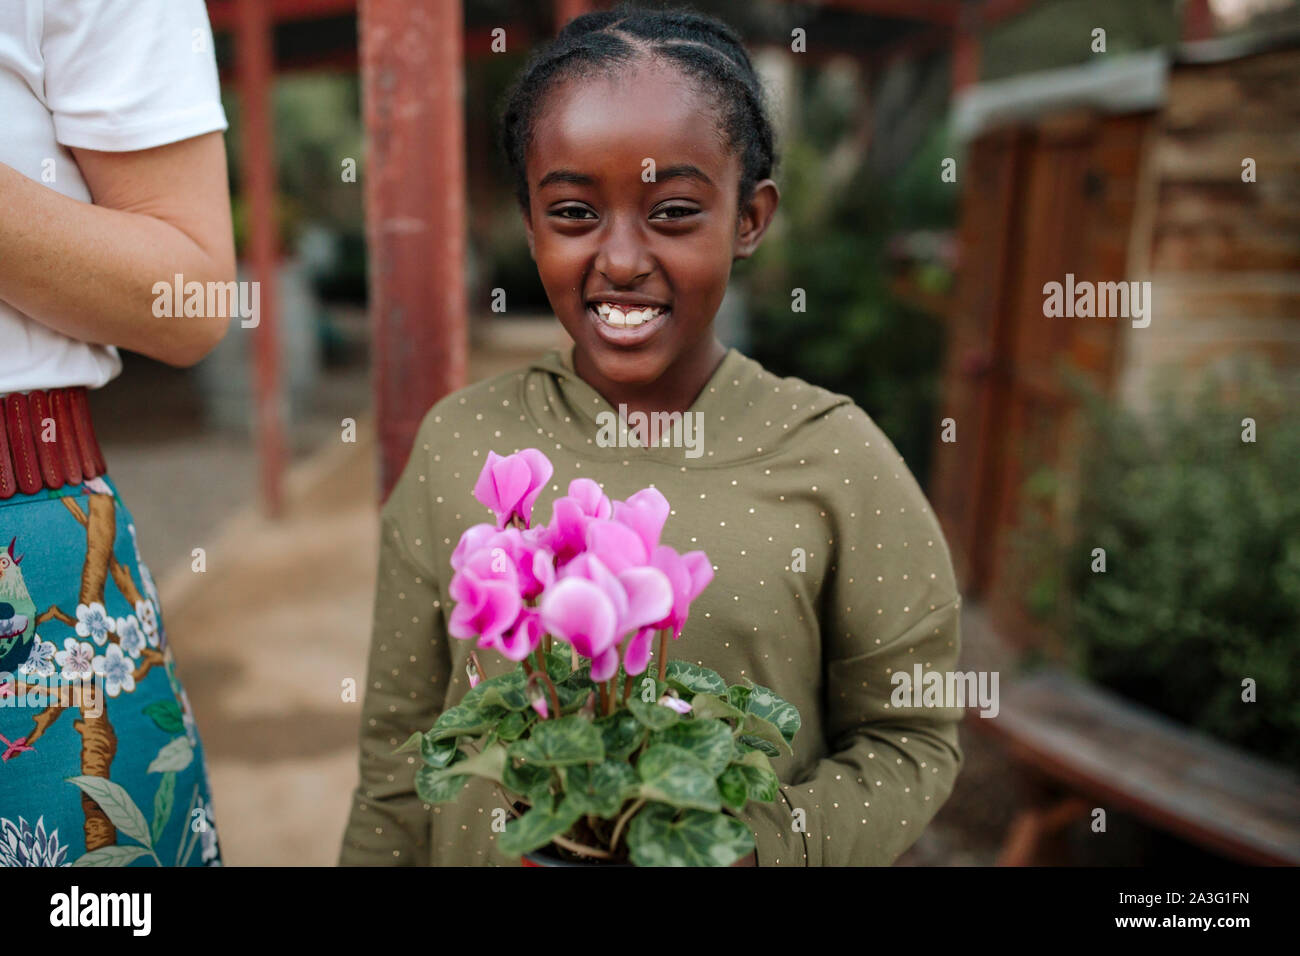 Smiling black girl holding plant with pink flowers at nursery Stock Photo